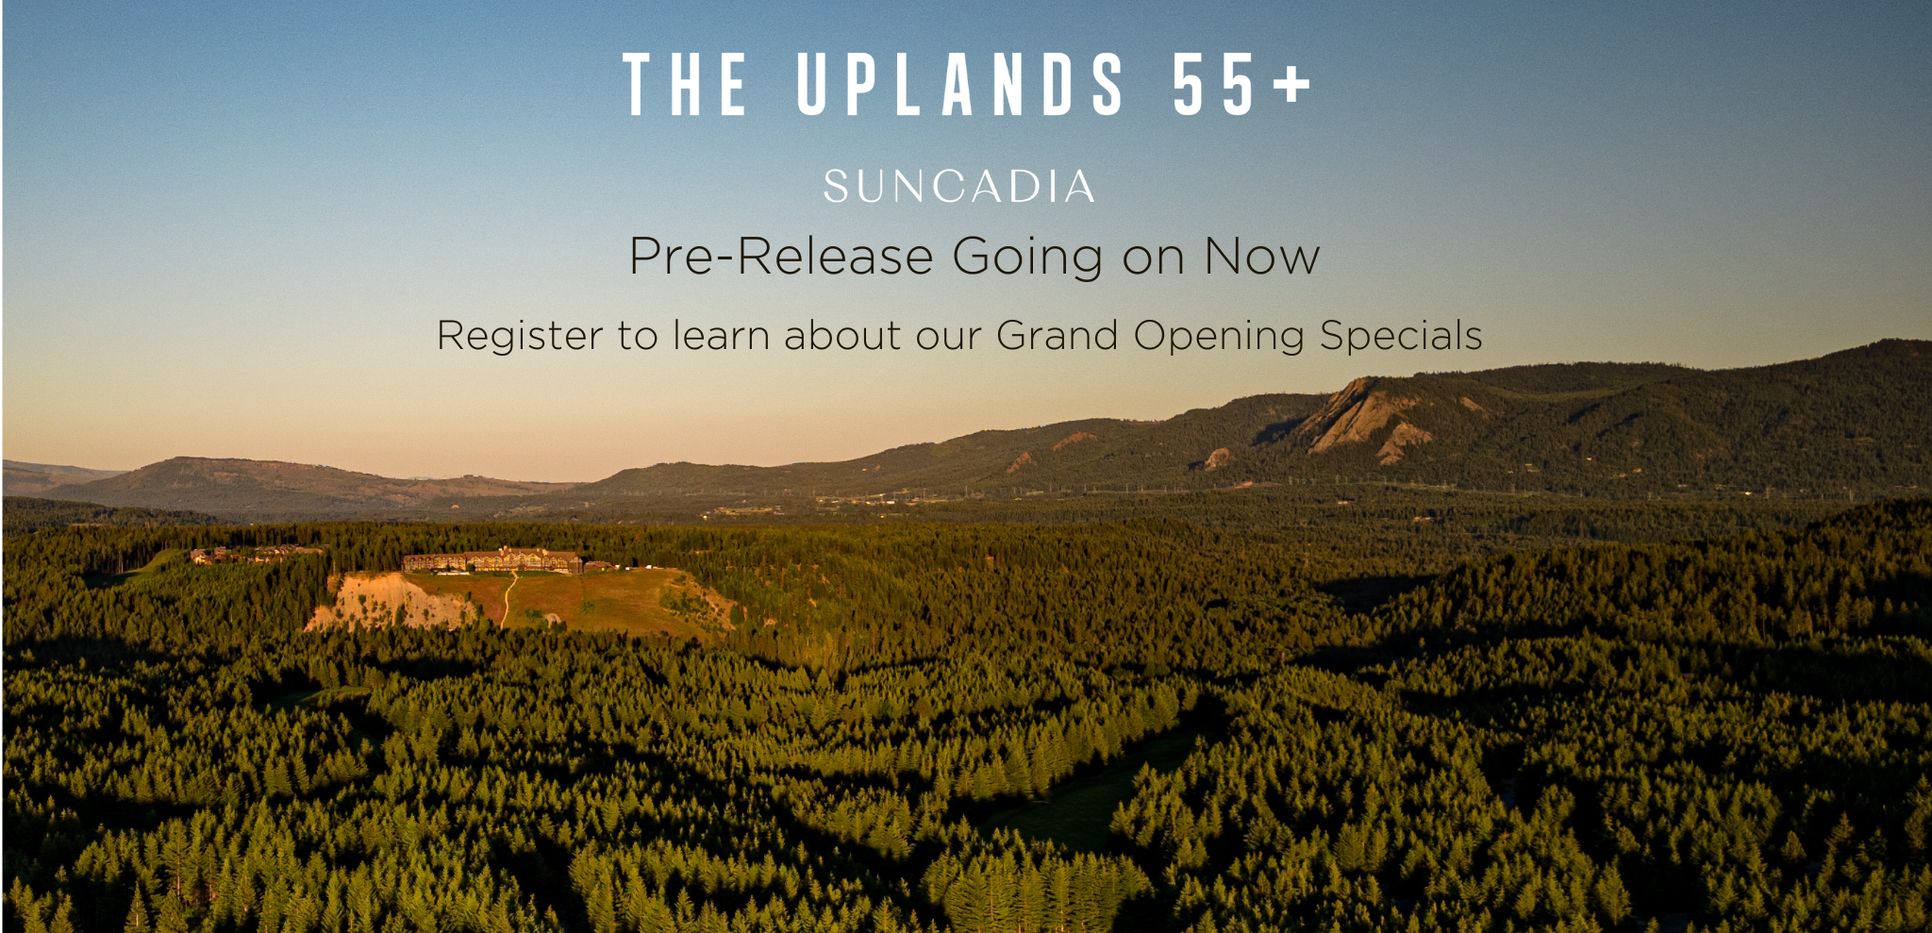 The Uplands 55+,98922